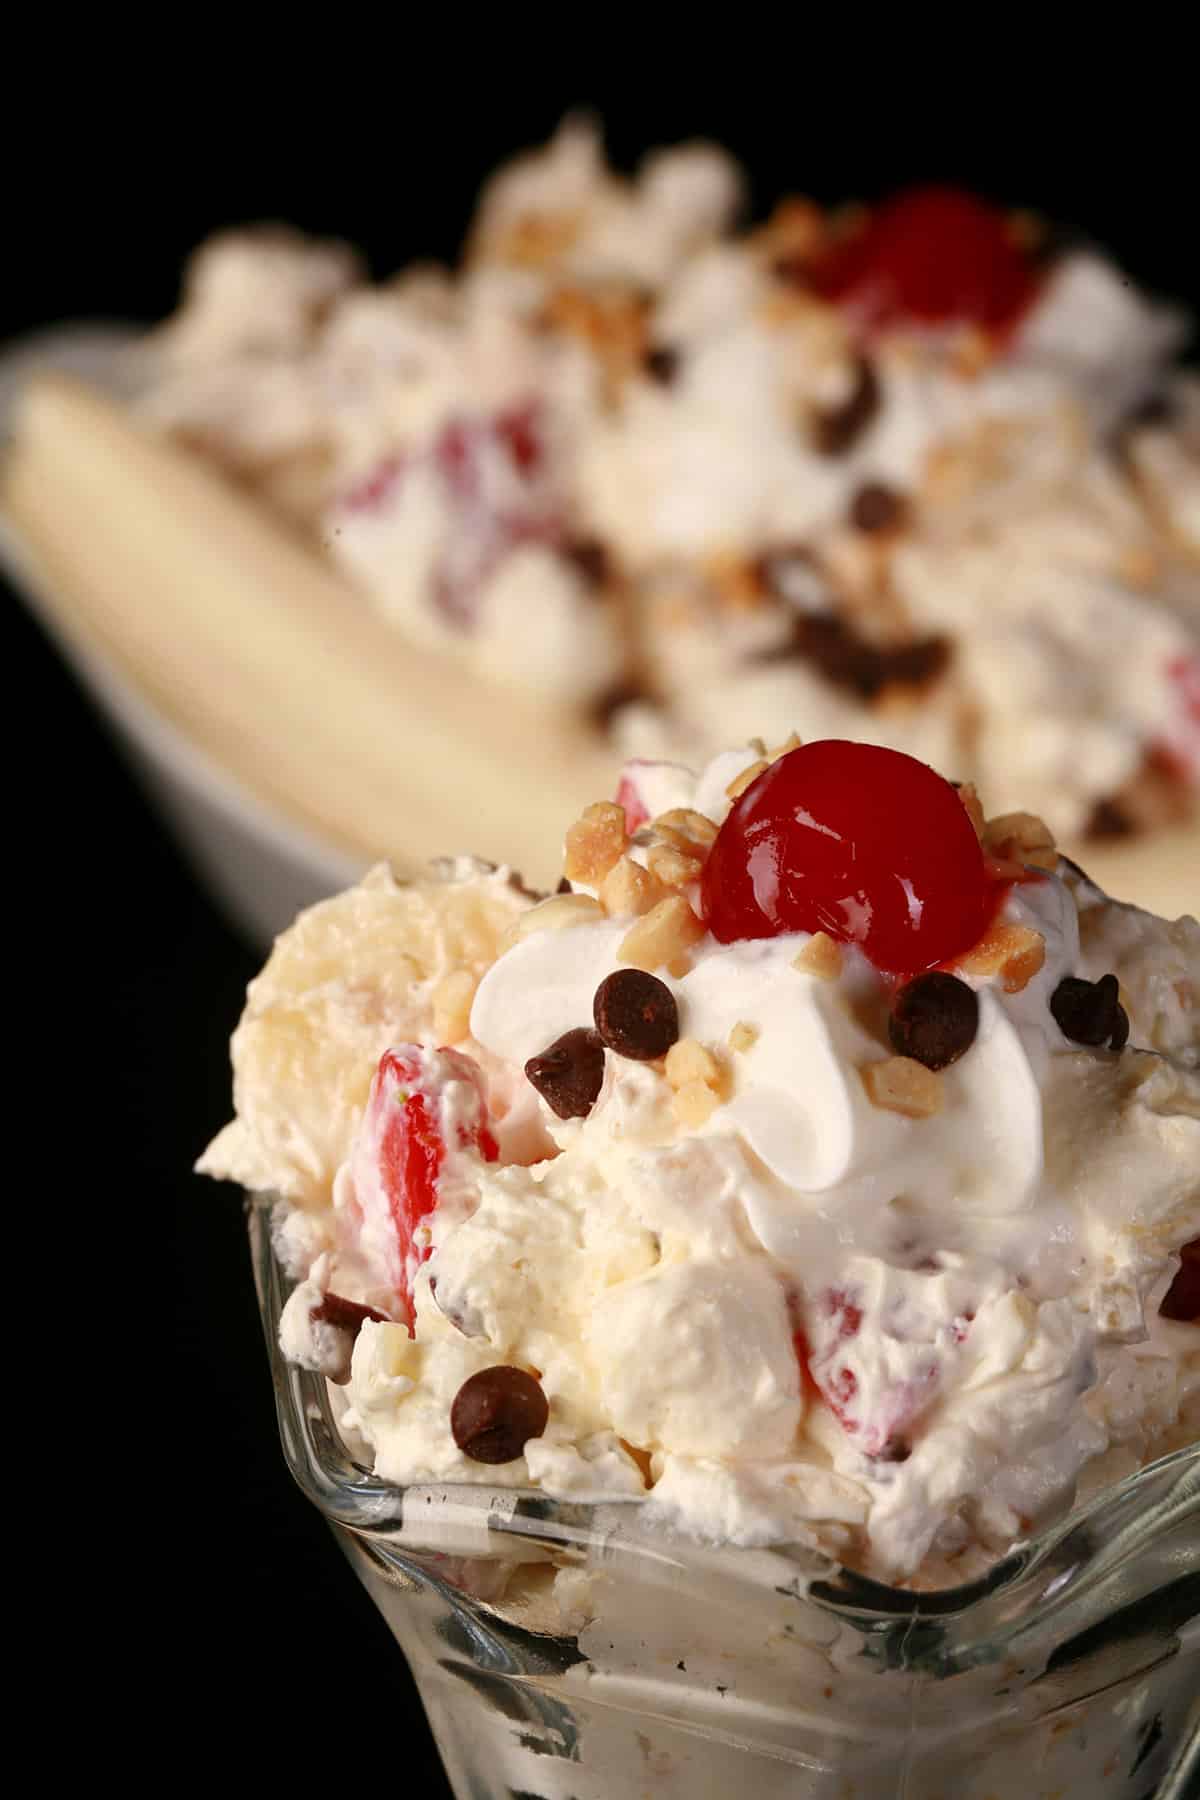 Banana Split Fluff Salad in a glass bowl, in front of a serving done up like an actual banana split.